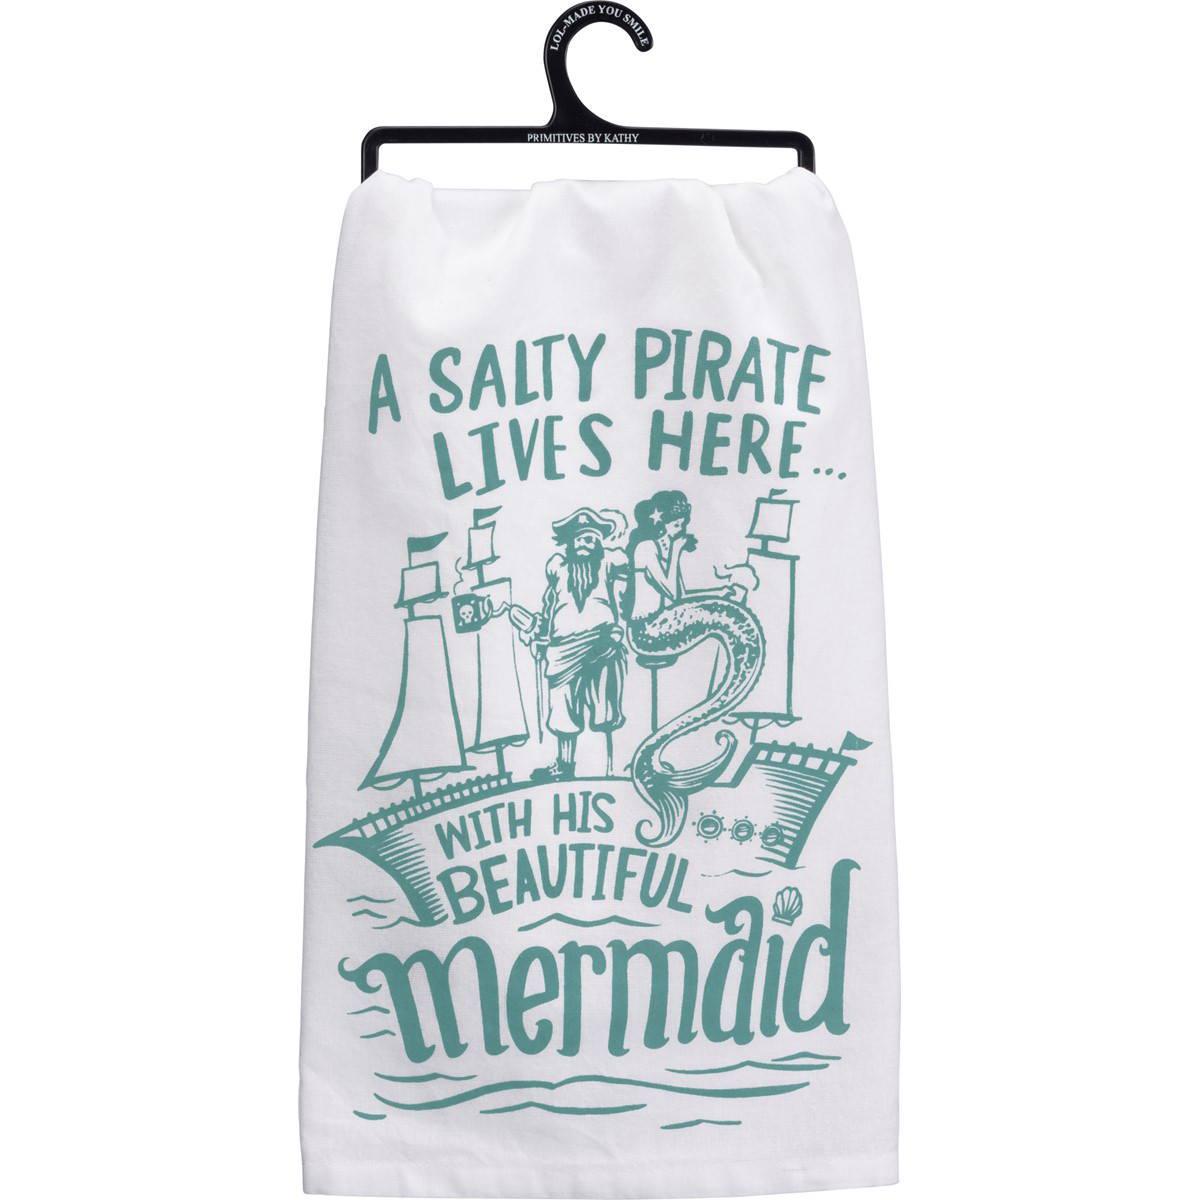 kitchen towel with a pirate-themed design that says "A salty pirate lives here... with his beautiful mermaid" 